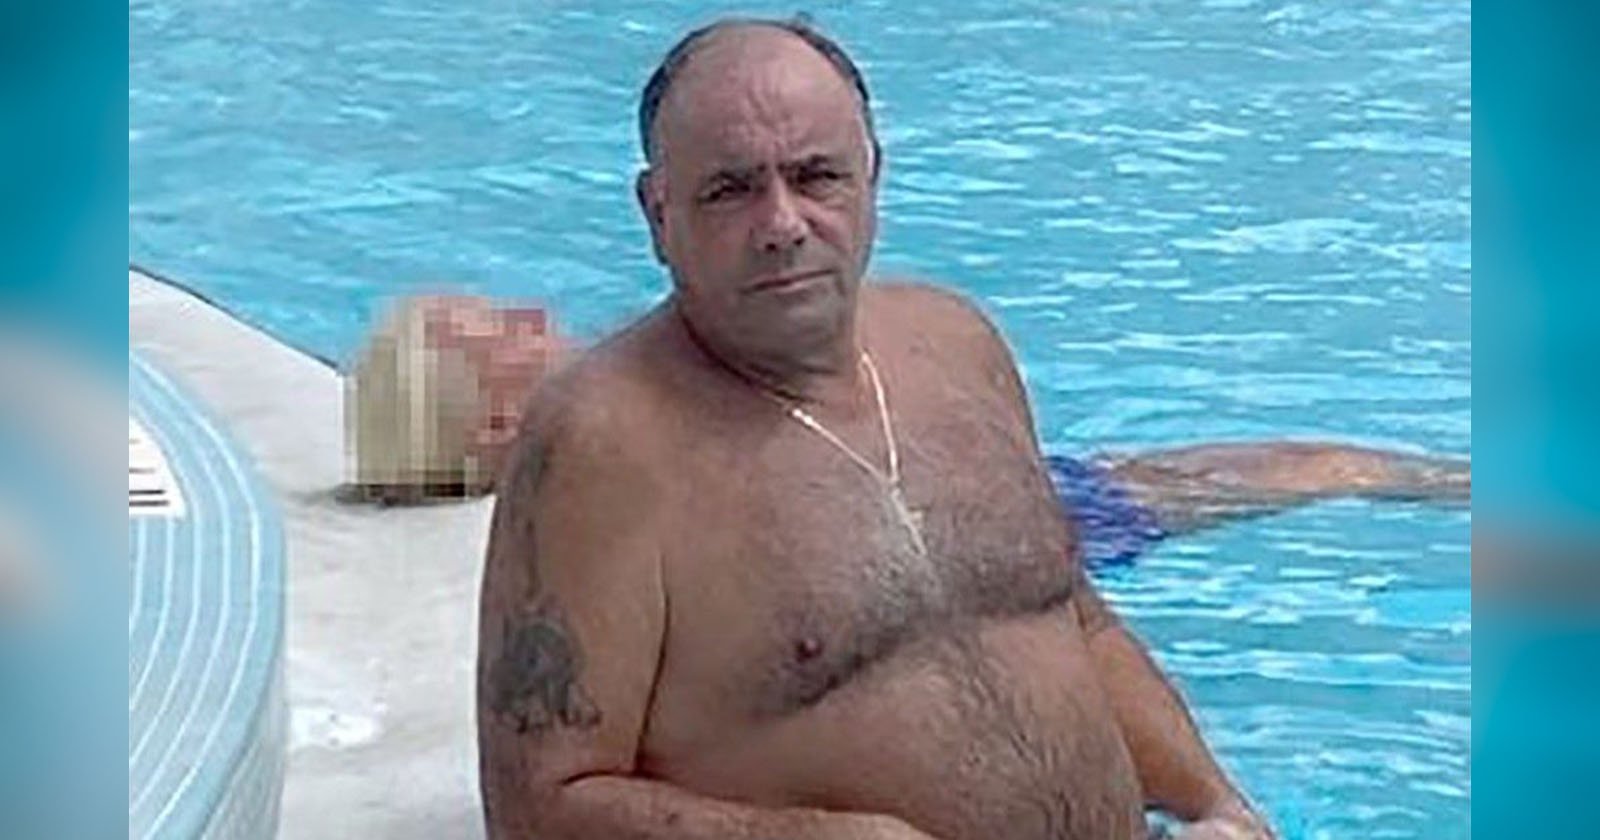 Mobster Does Not Regret the Great Topless Photo That Led to Arrest